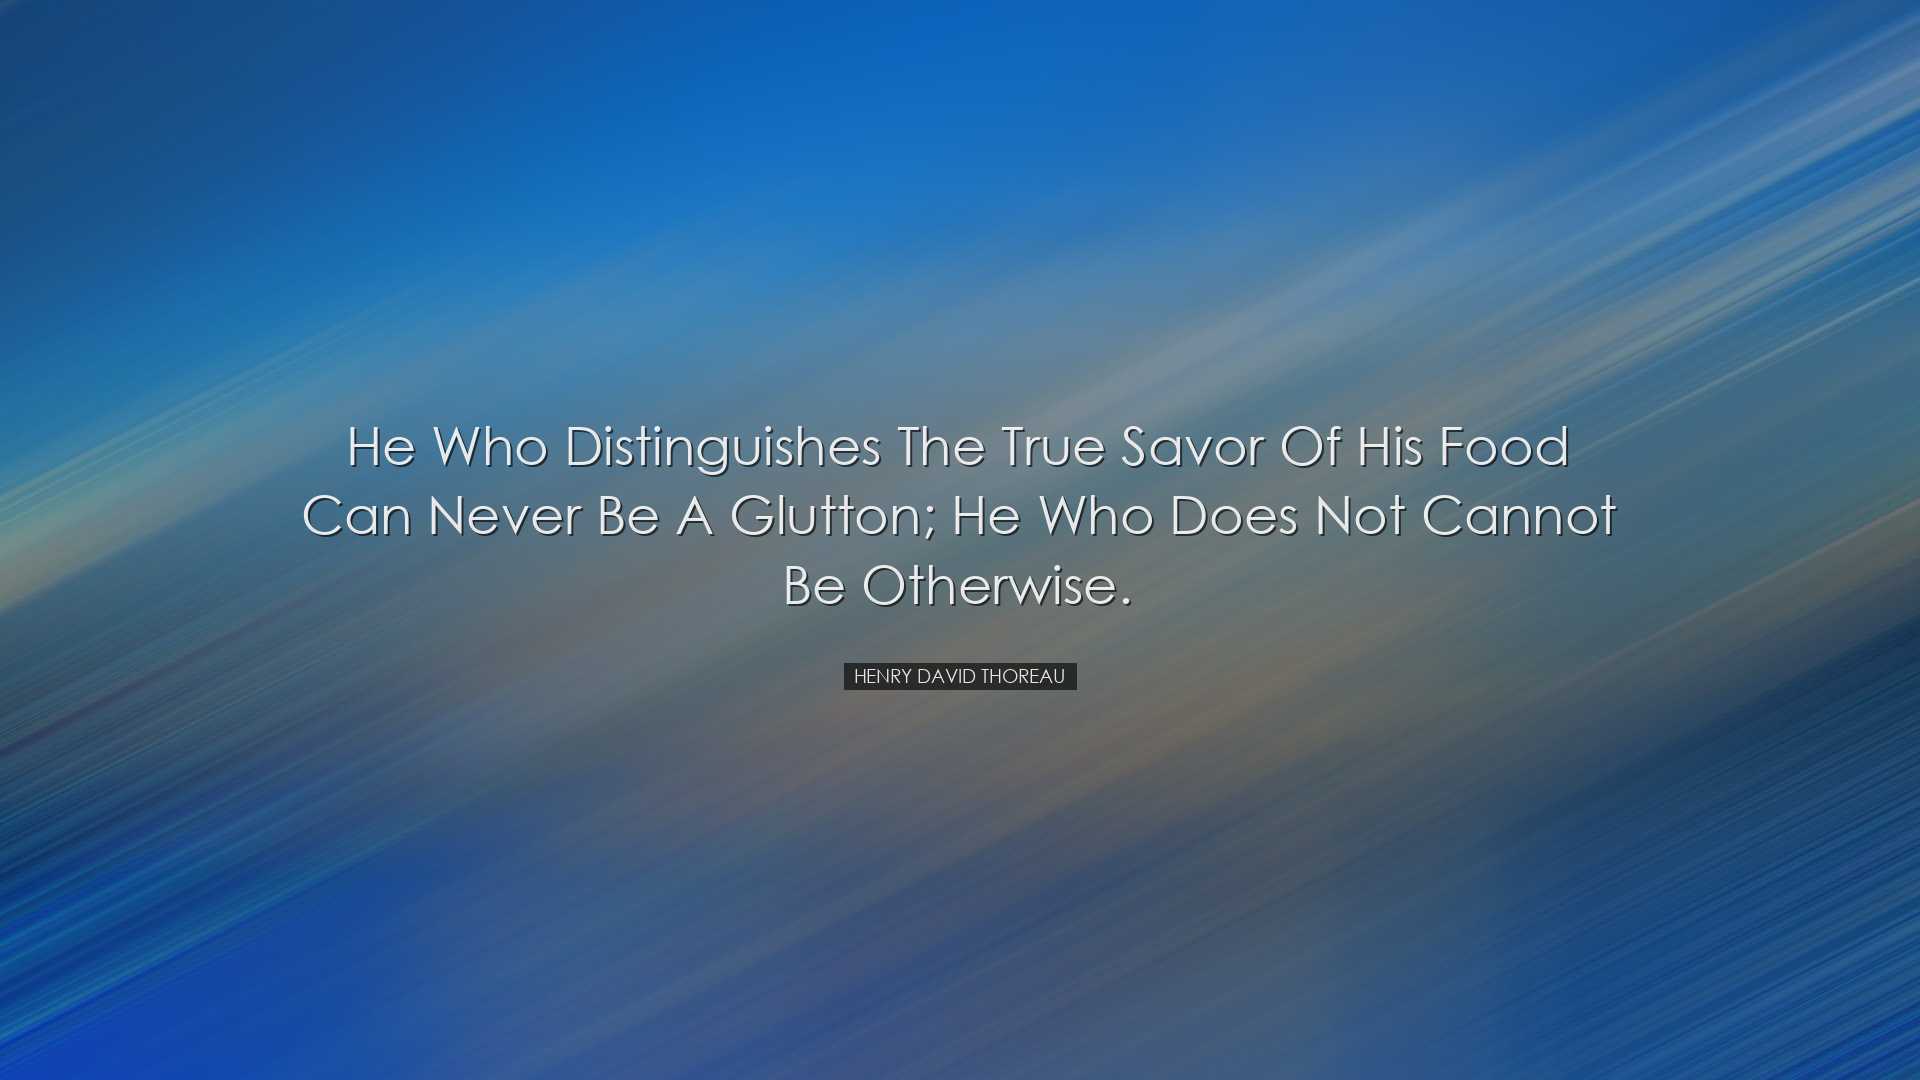 He who distinguishes the true savor of his food can never be a glu